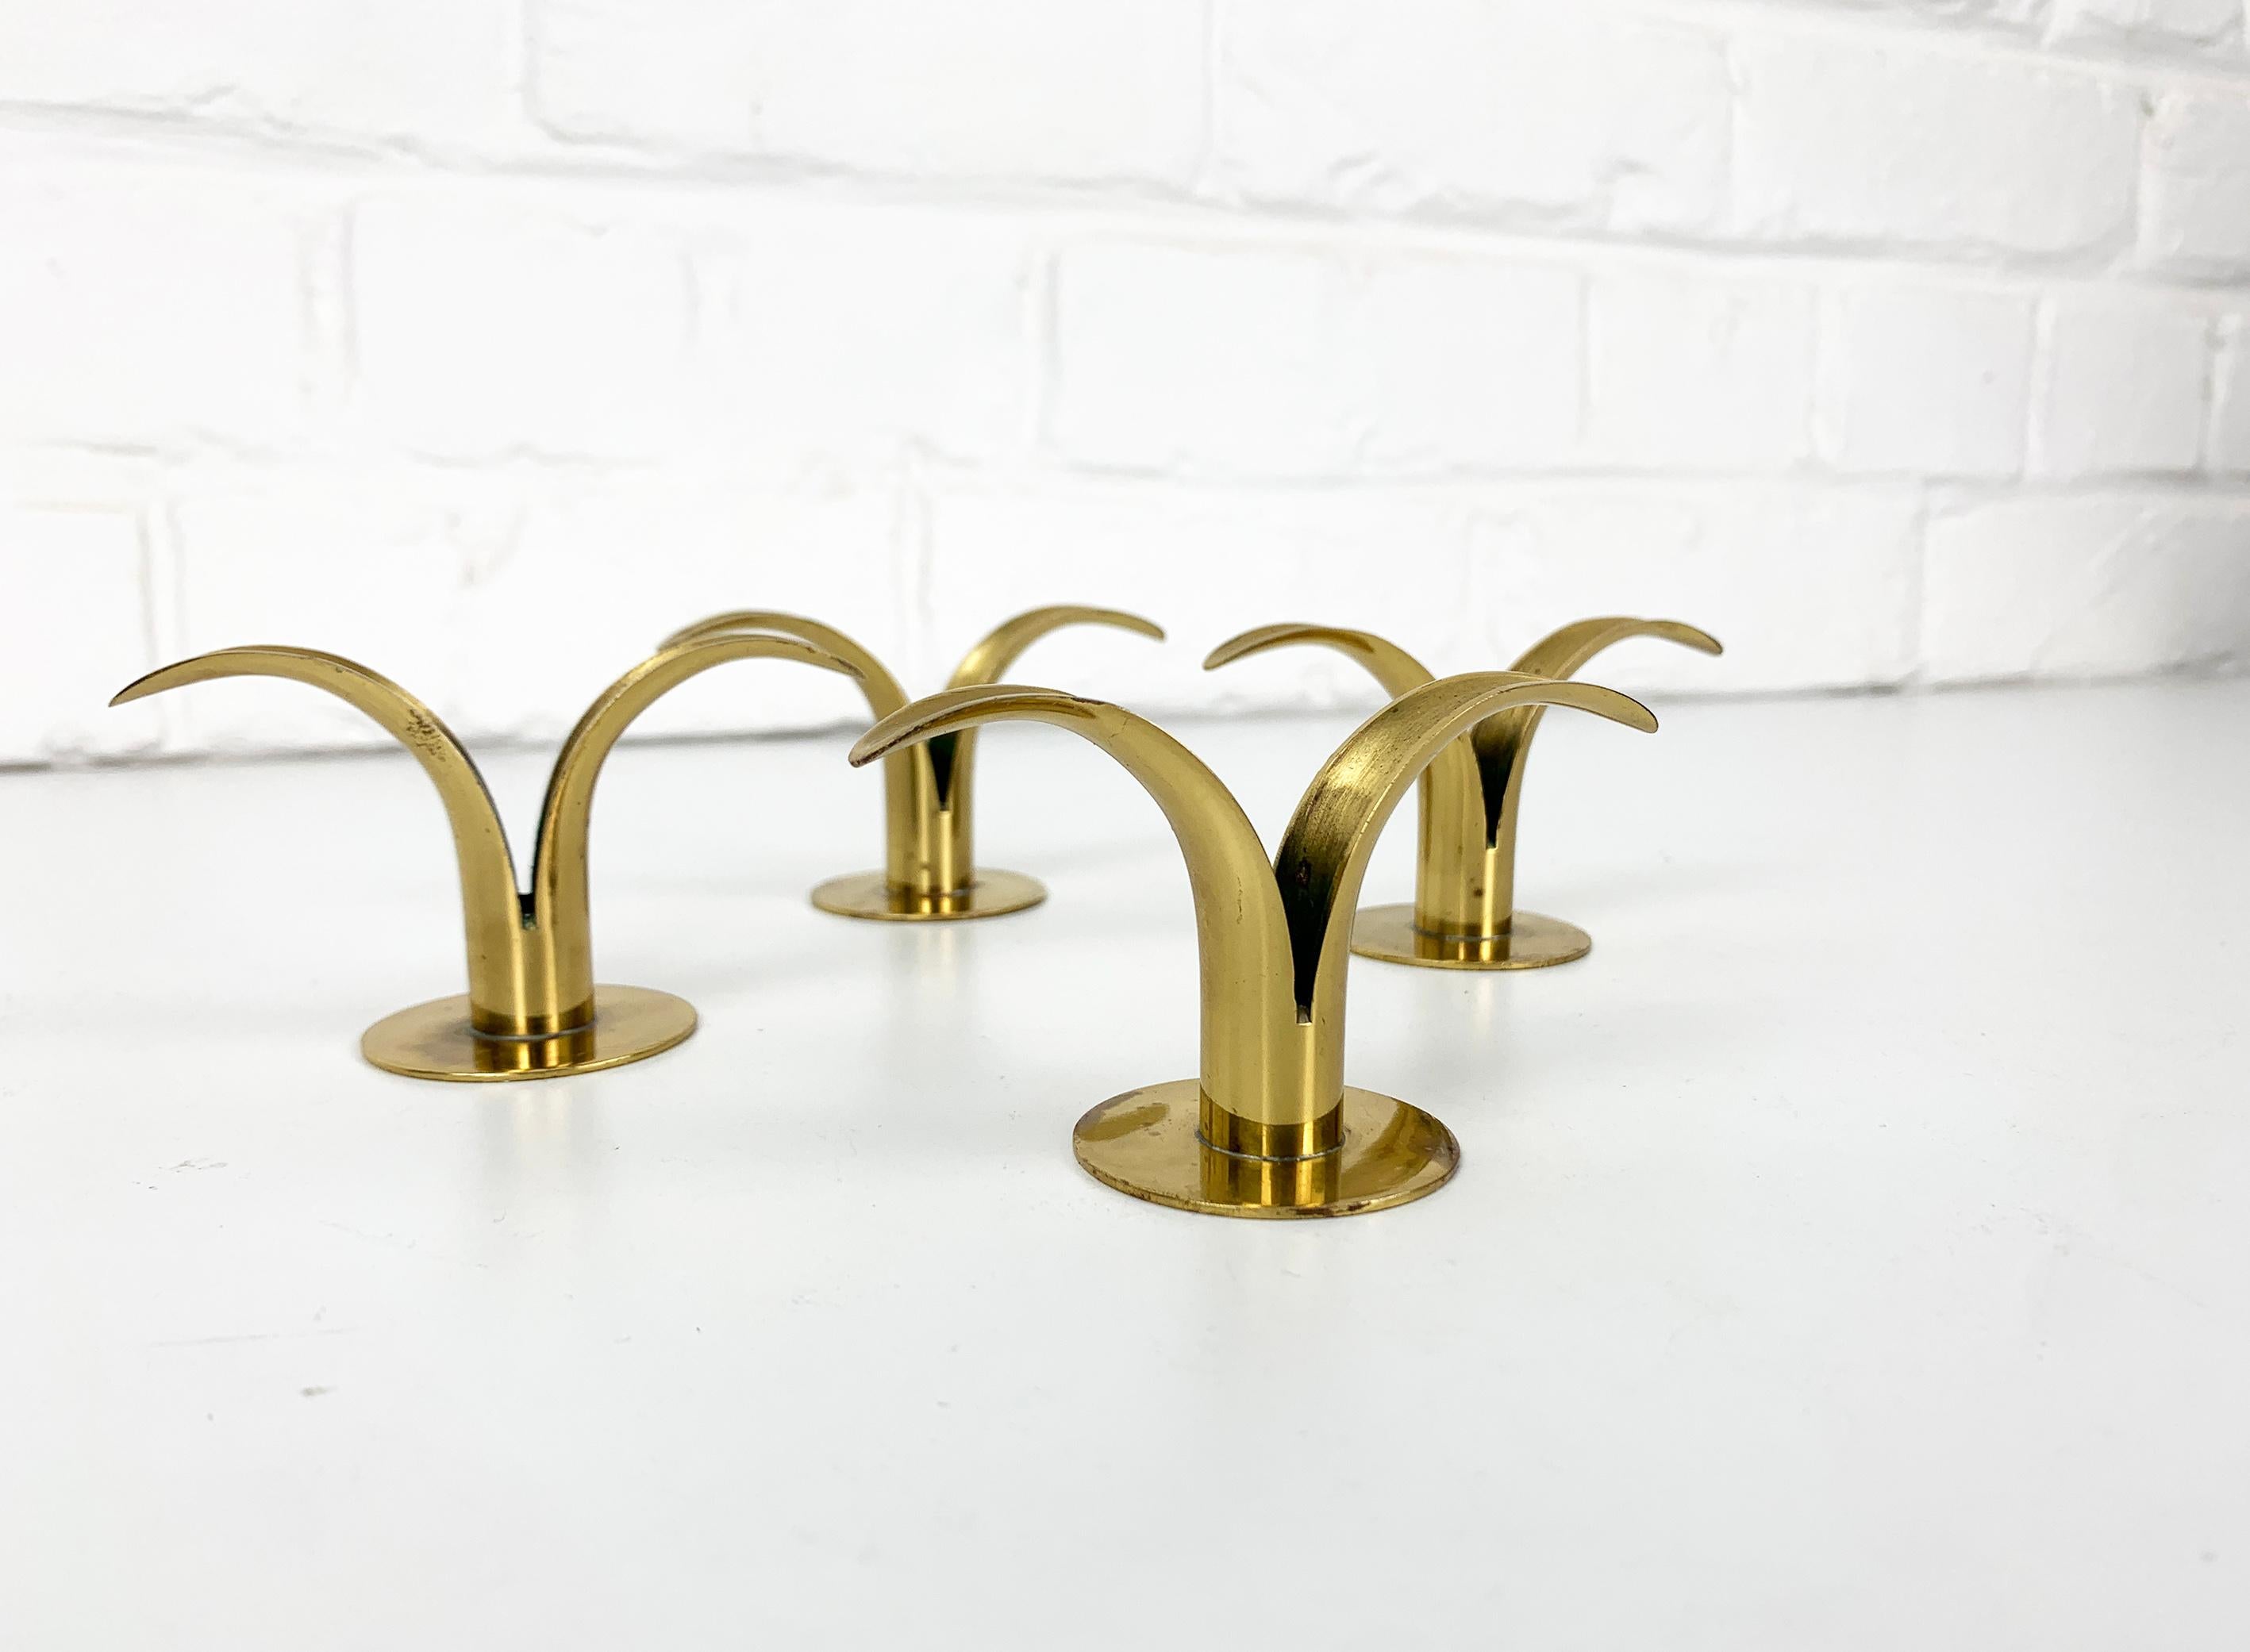 Set of 4 Mini-version of the iconic Mid Century brass candle holders “Lily”. This small version is a rare find. Only 9 cm wide / 5cm height !

Manufactured in Sweden by Lbe Konst, Ystad. 
Made of solid brass.

The last photograph shows the